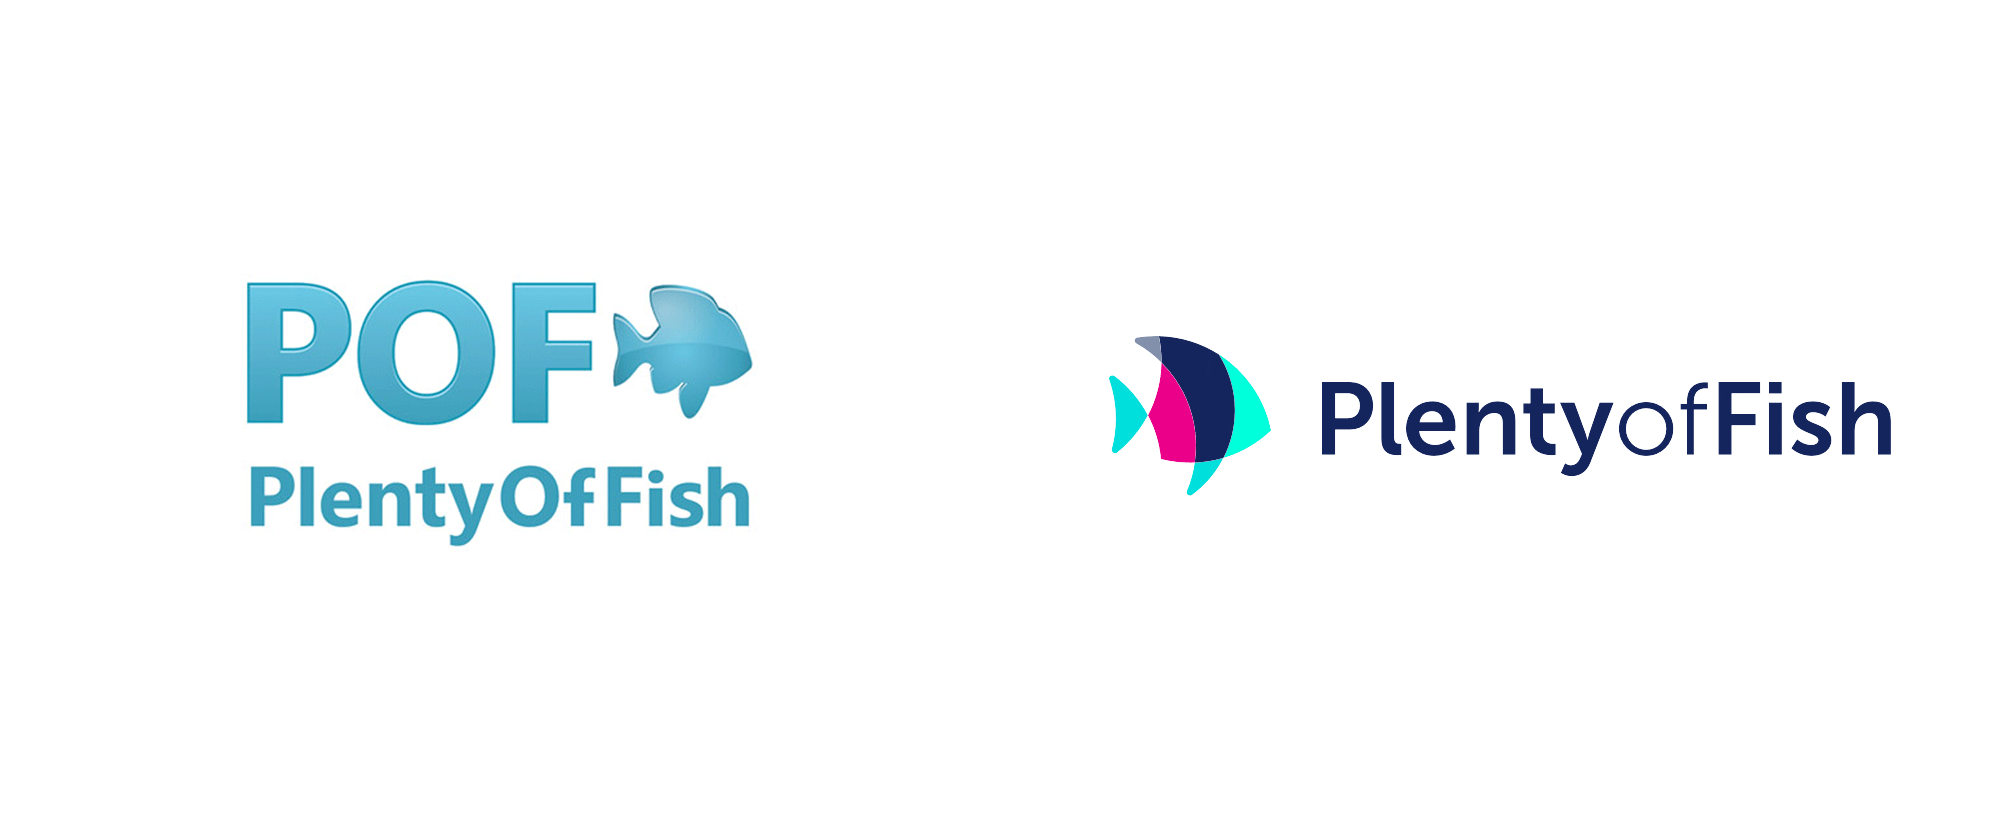 Plenty Of Fish Online Dating App And Website Without Registering